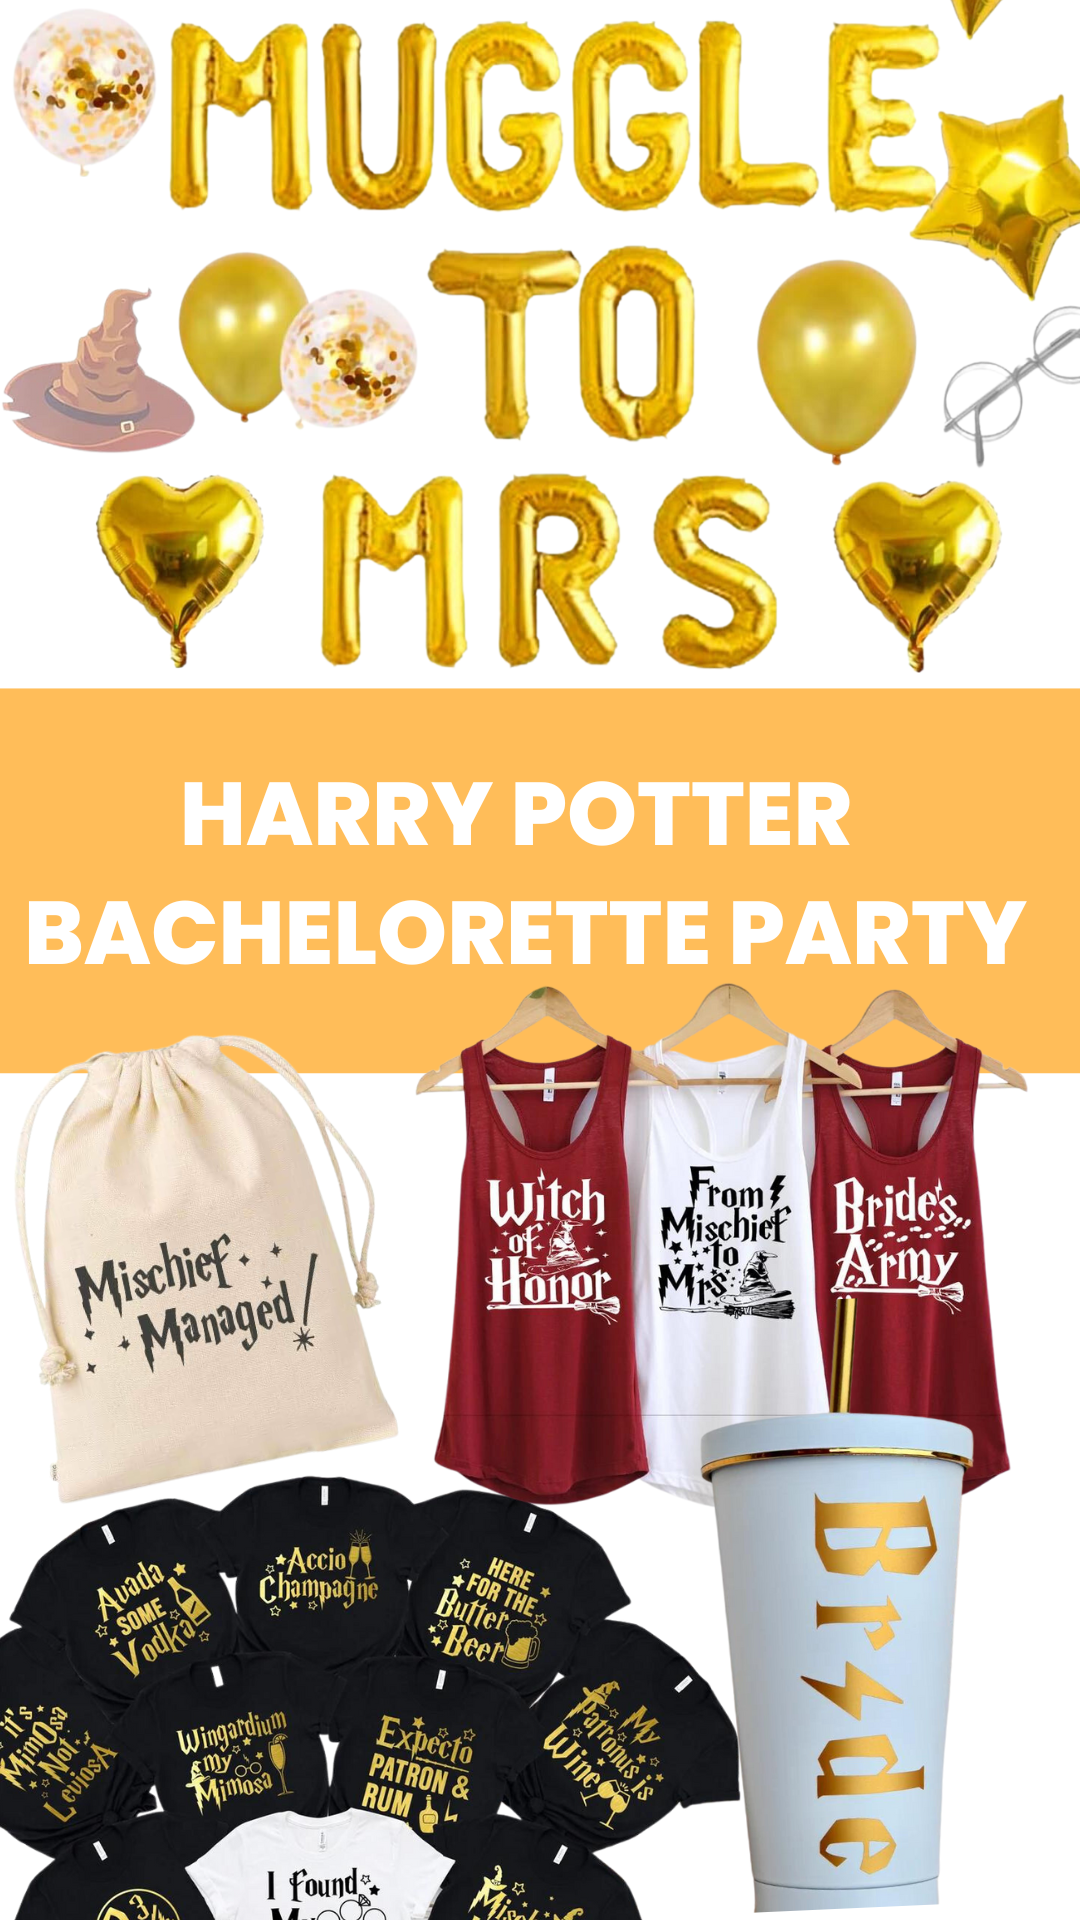 Harry Potter Bachelorette Party: Ideas and Planning Tips - Bach Bride